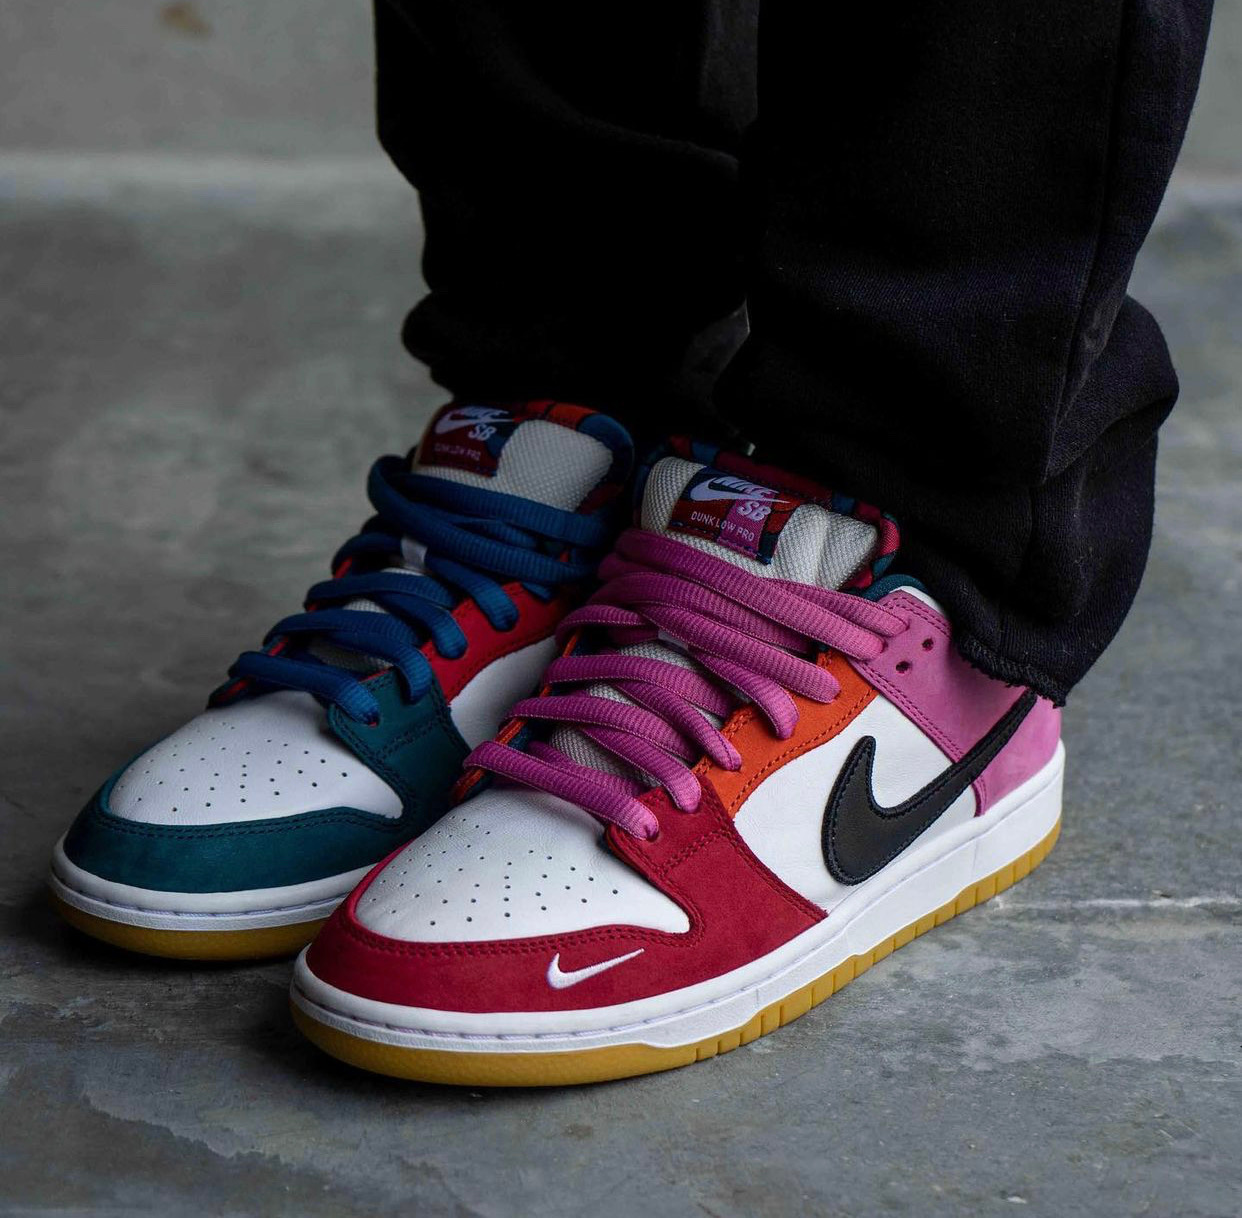 Nike Piet Parra SB Dunk Friends and Family